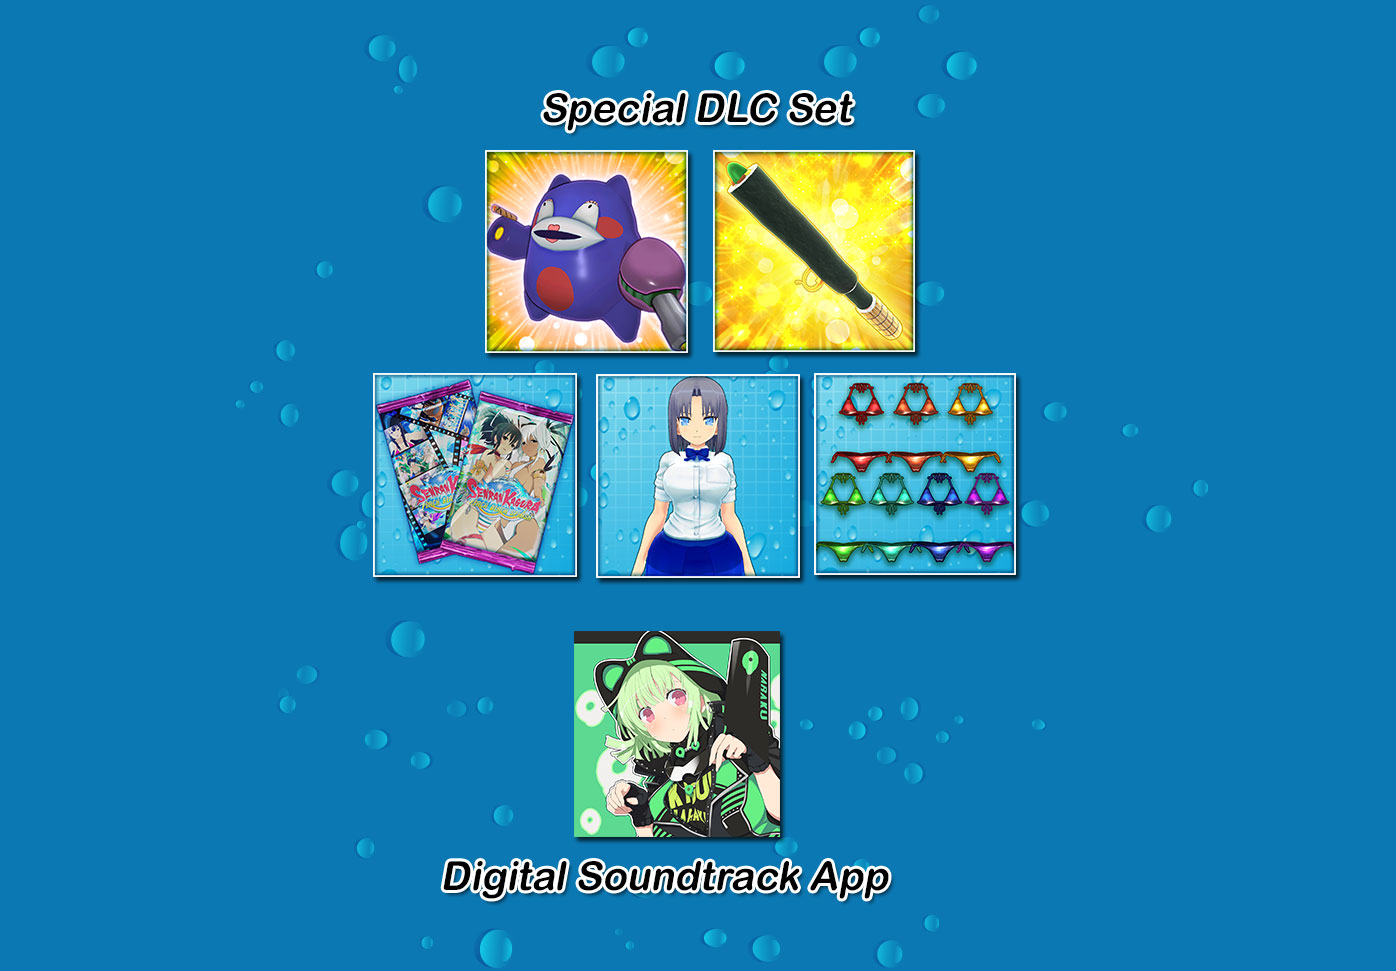 Limited Edition Sexy Soaker DLC Set and Digital Soundtrack App